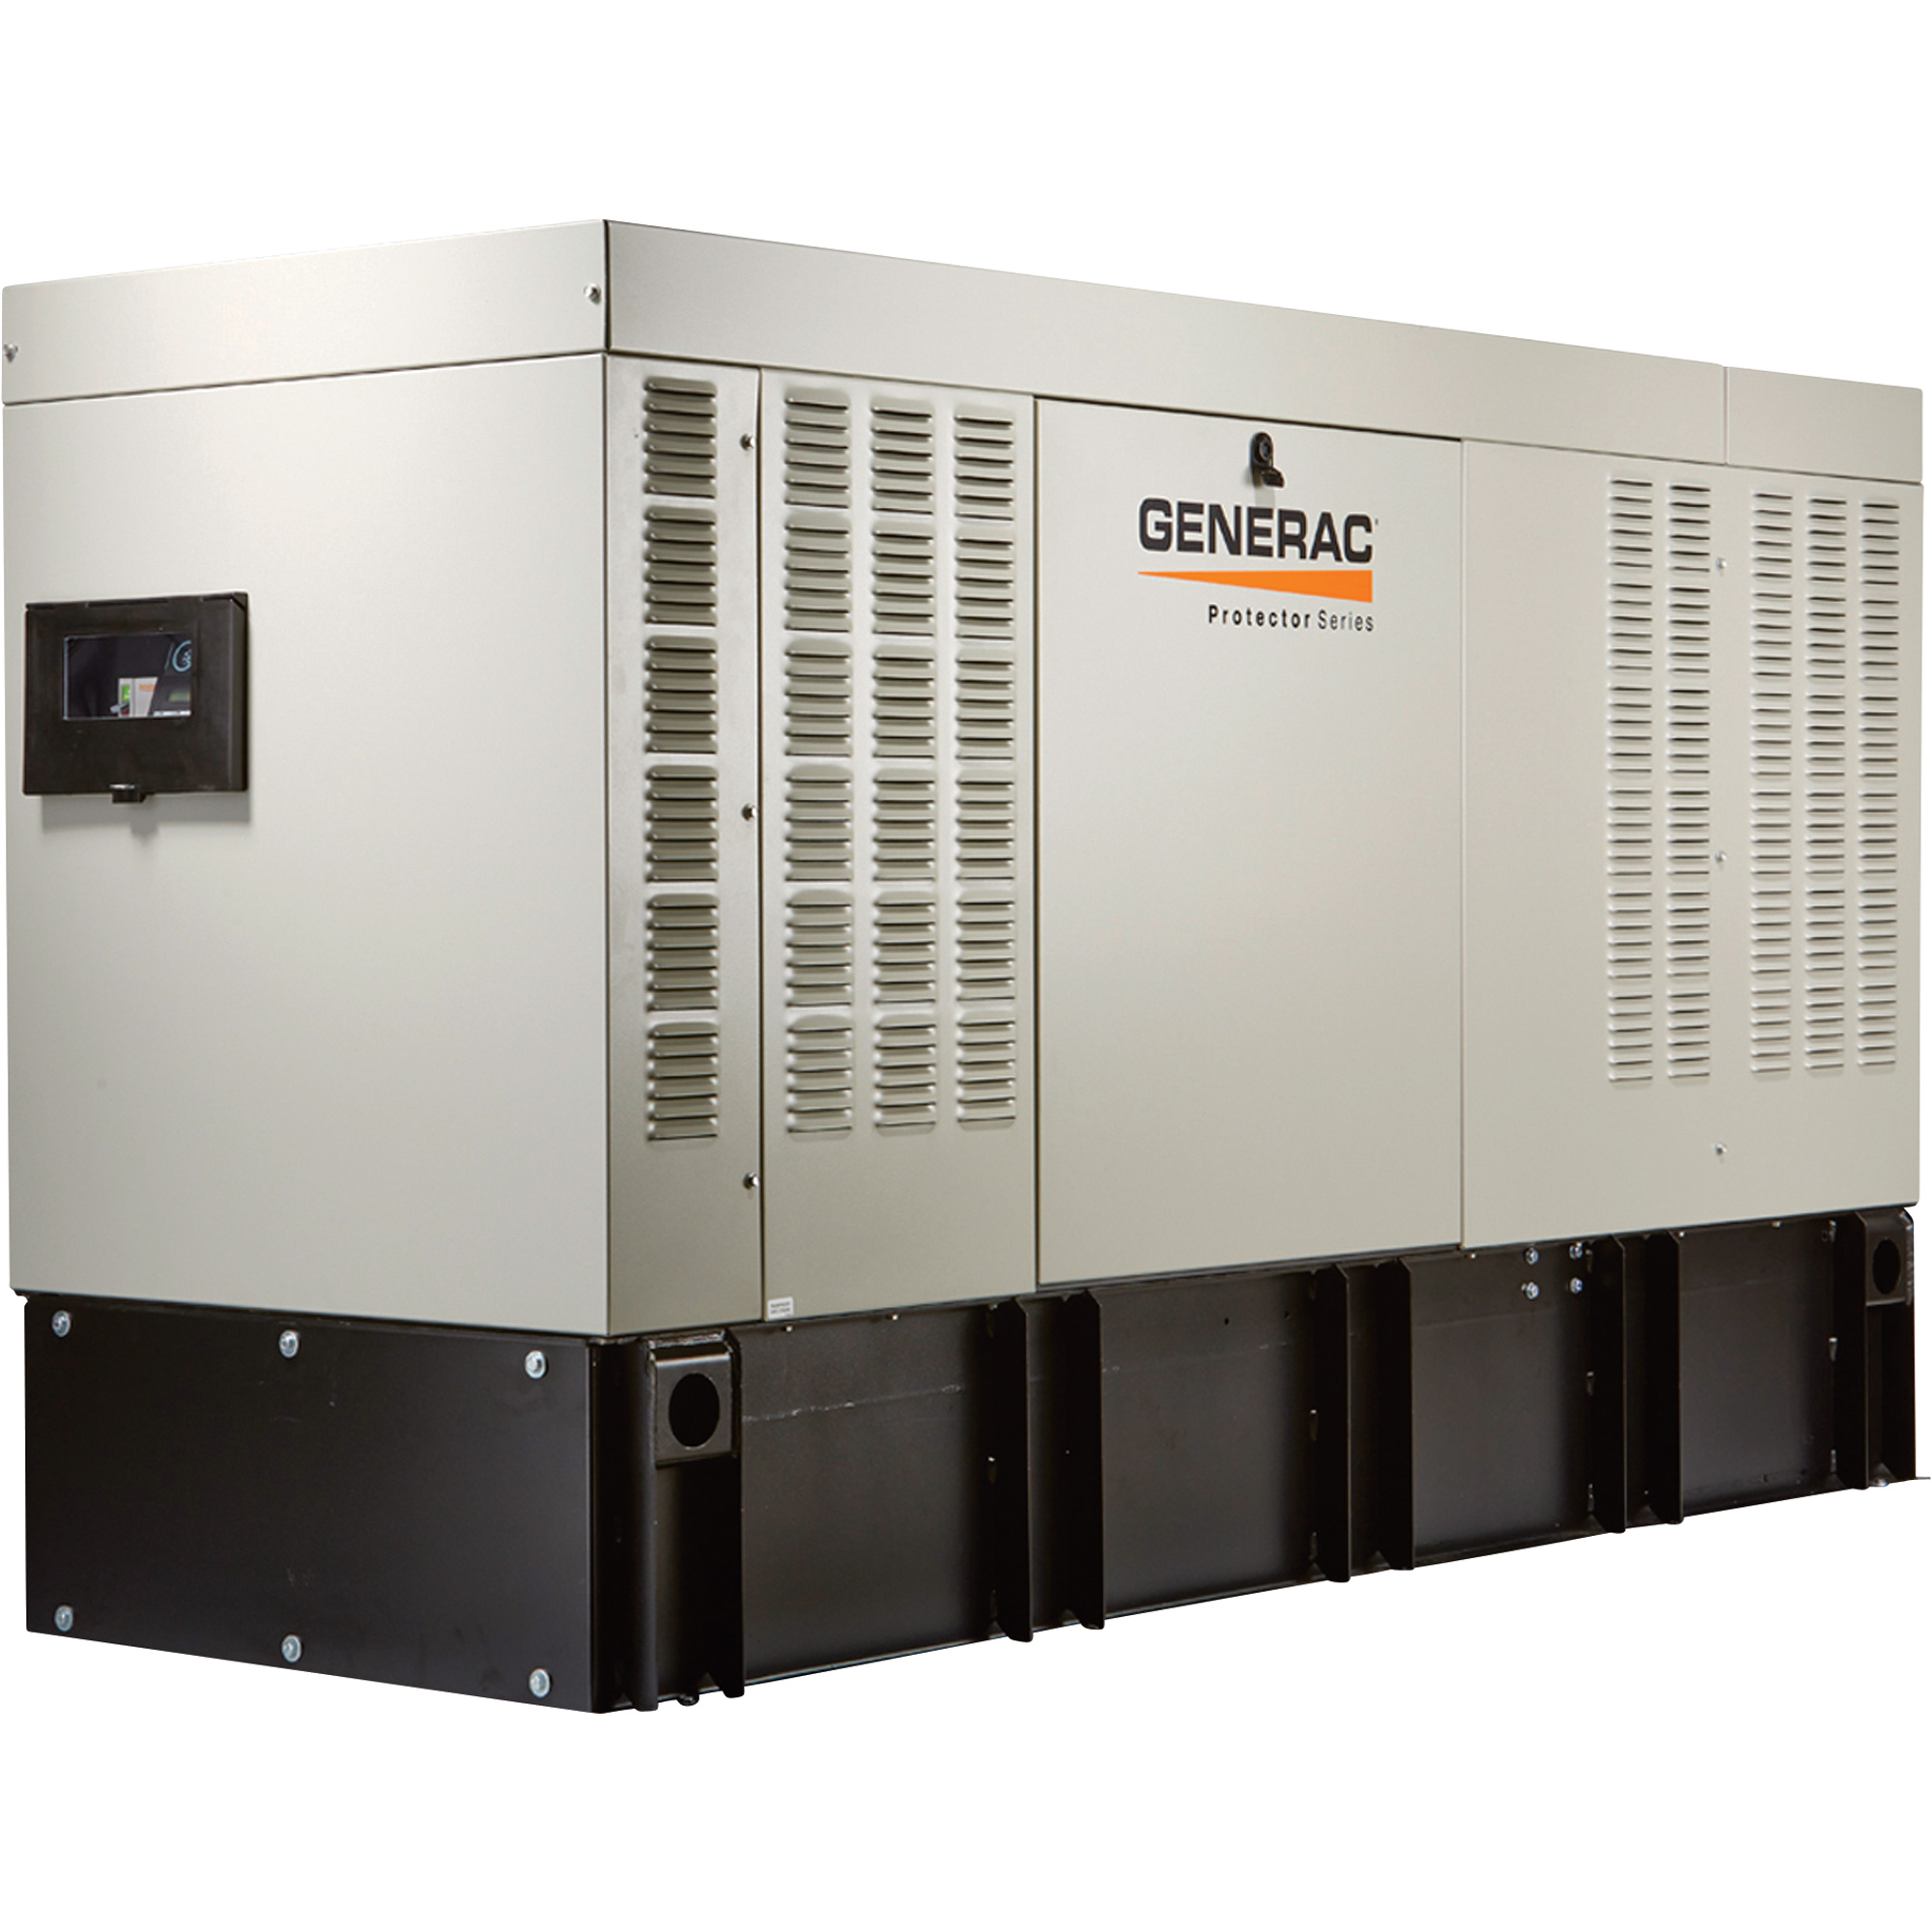 Generac Protector Series Diesel Home Standby Generator 15kW 120 240 Volts 3 Phase